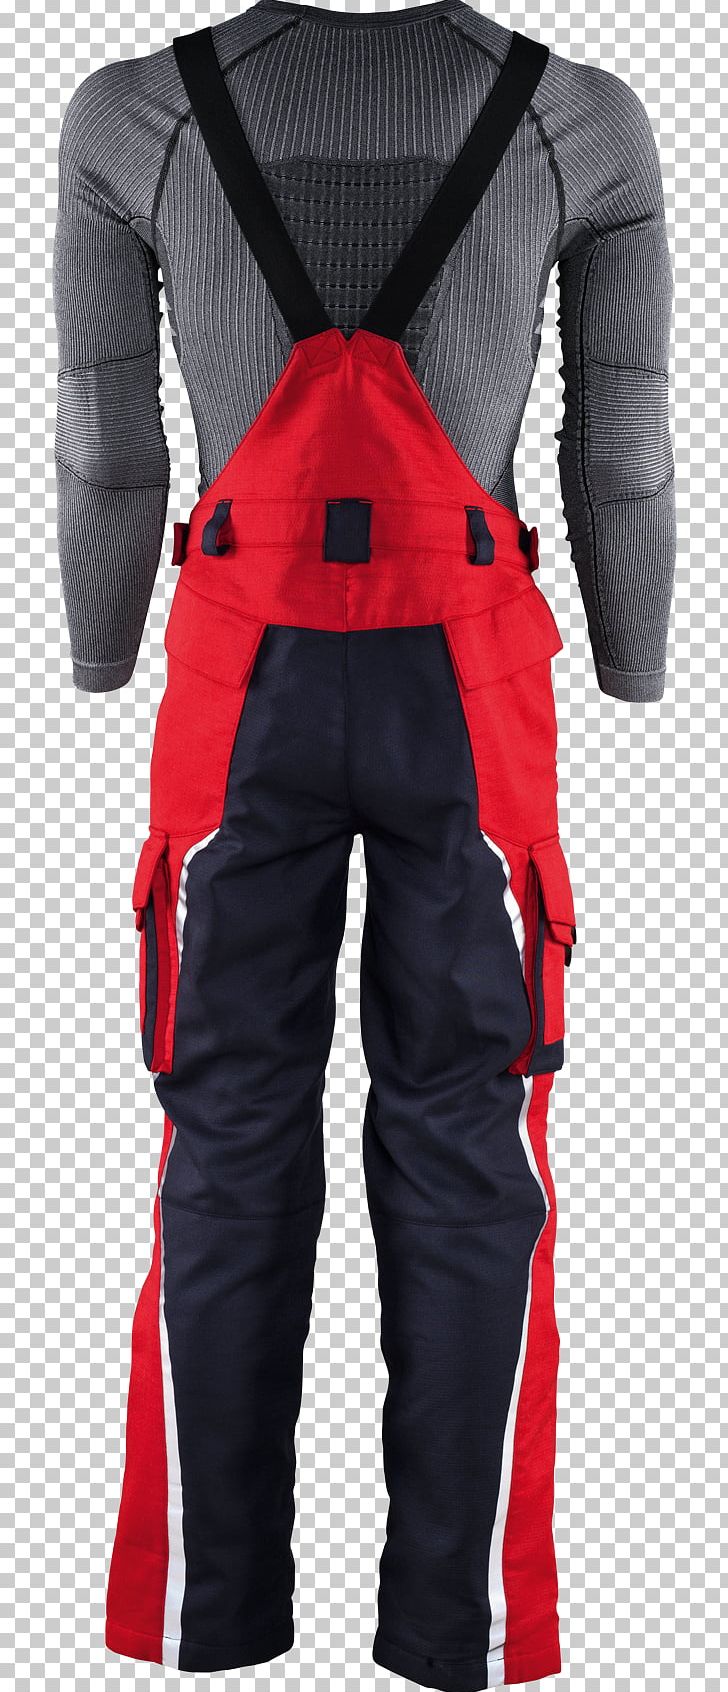 Dry Suit Hockey Protective Pants & Ski Shorts PNG, Clipart, Dry Suit, Flash Material, Hockey, Hockey Protective Pants Ski Shorts, Overall Free PNG Download